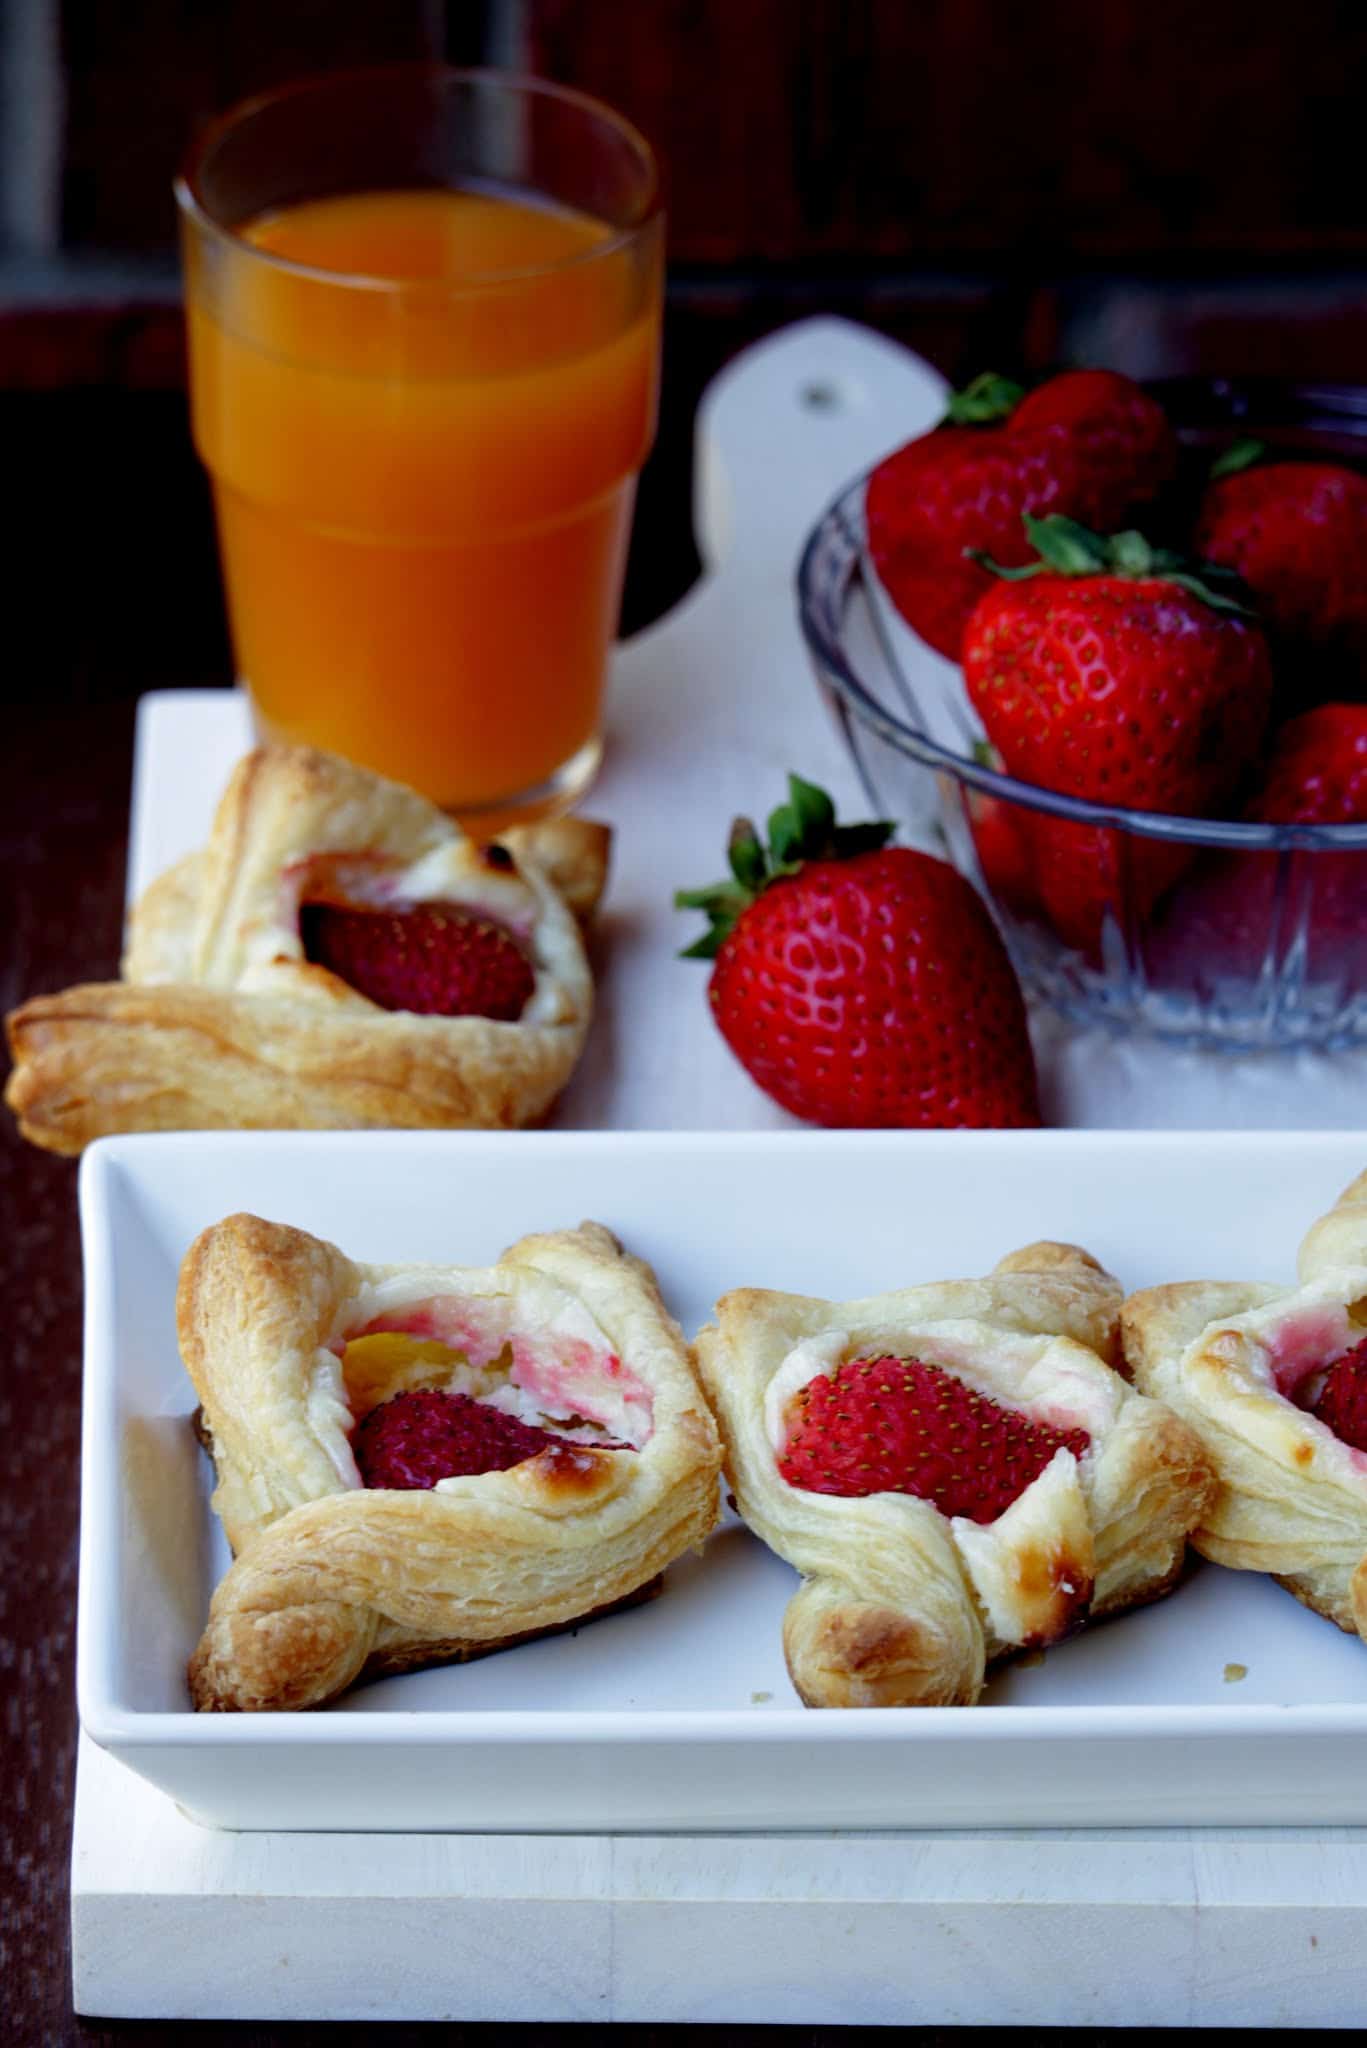 Ready to serve strawberry cream cheese pastry with juice